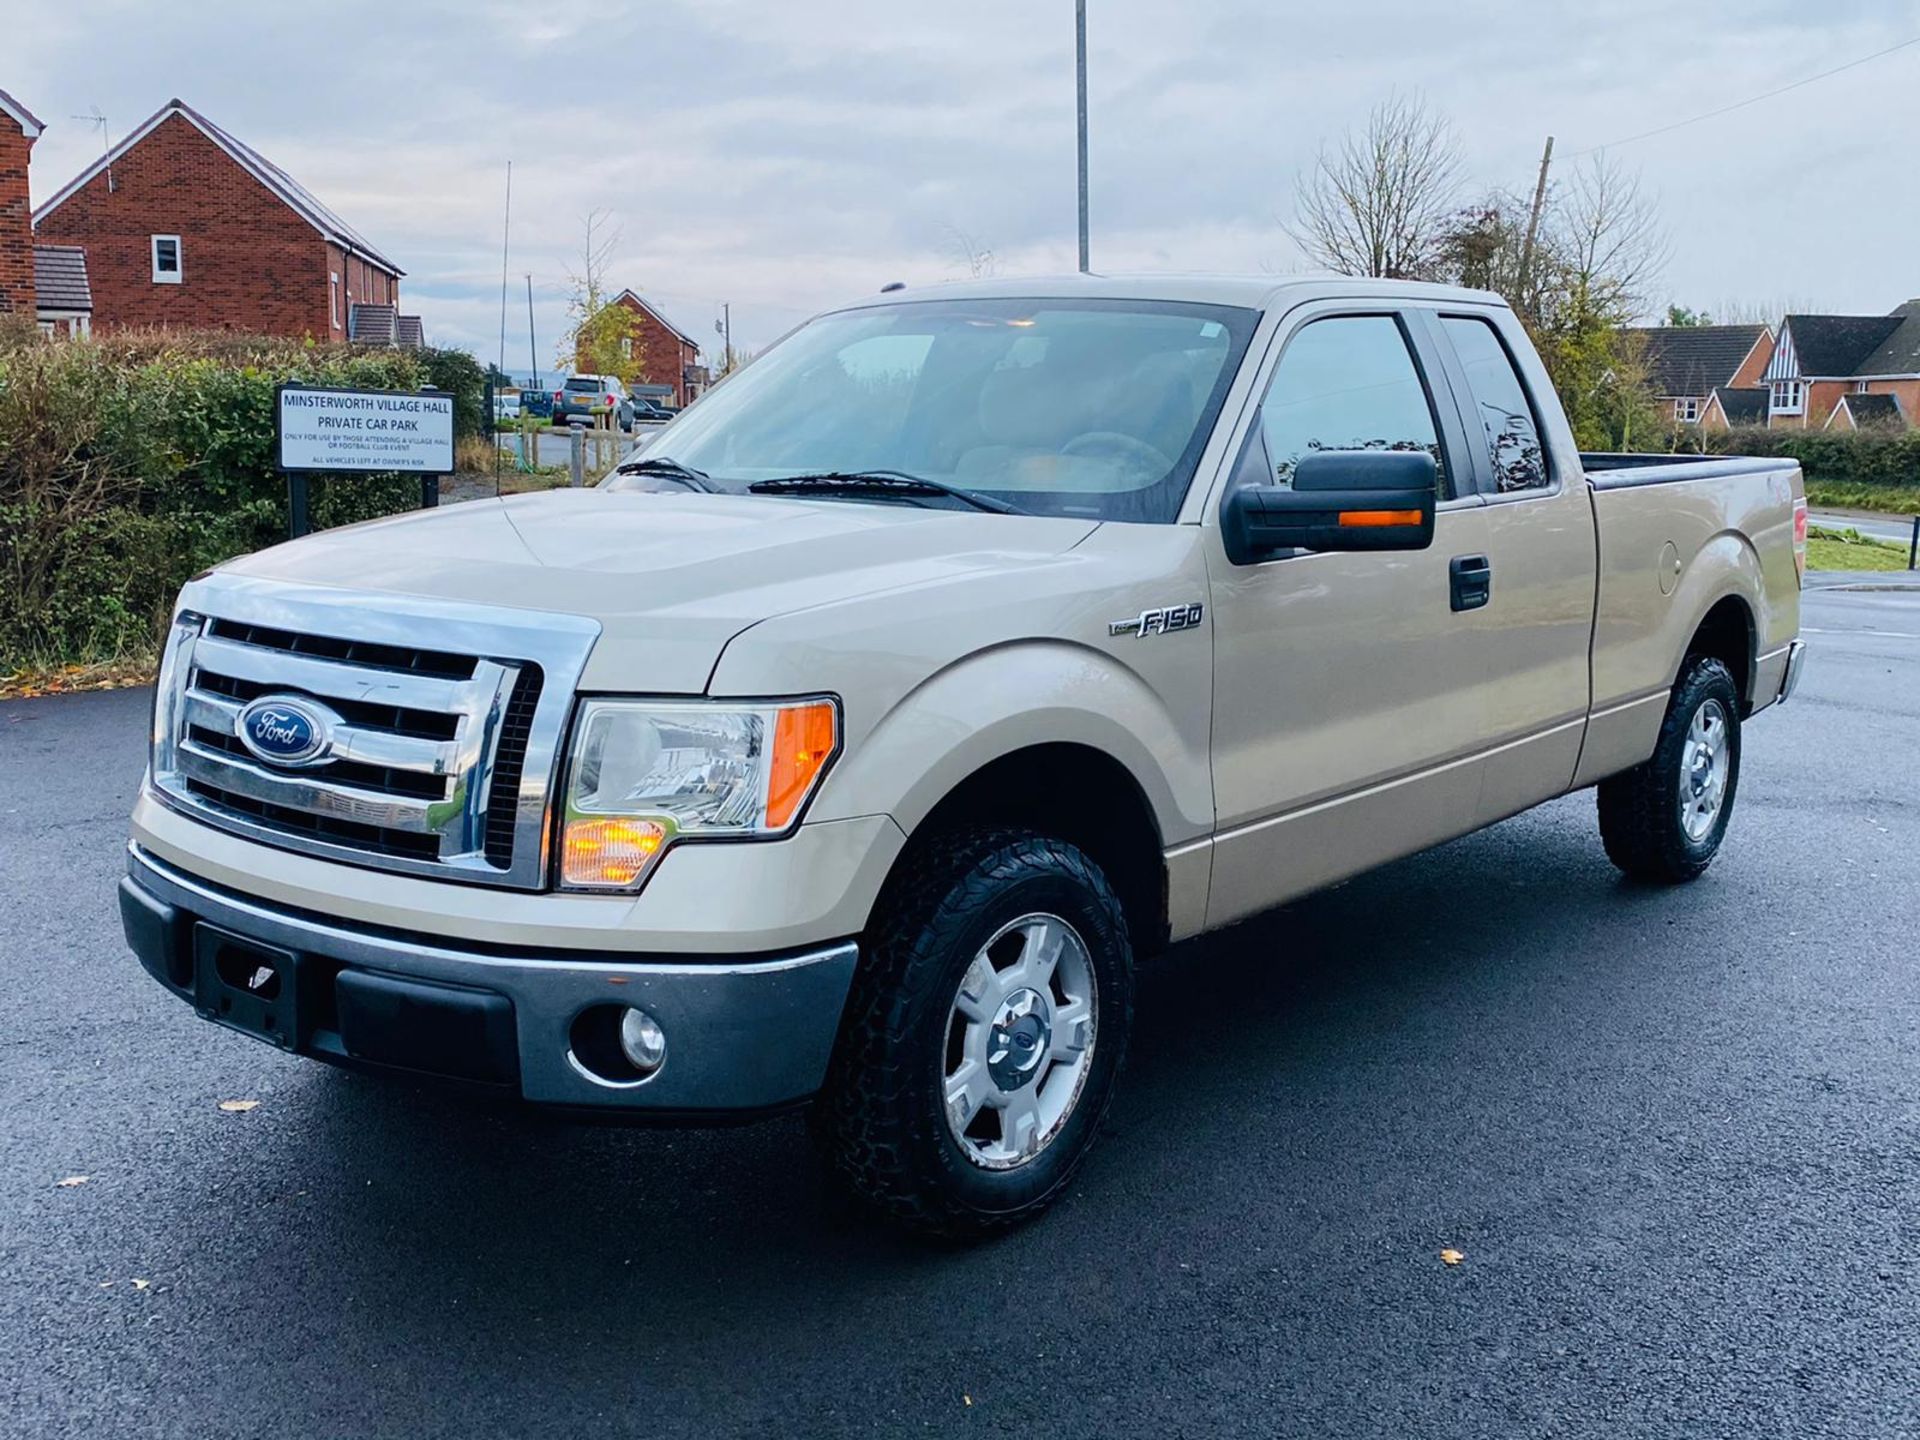 (RESERVE MET) Ford F-150 XLT 4.6L V8 Supercab - 2010 Year - 6 Seats - Fresh Imports - Image 3 of 39